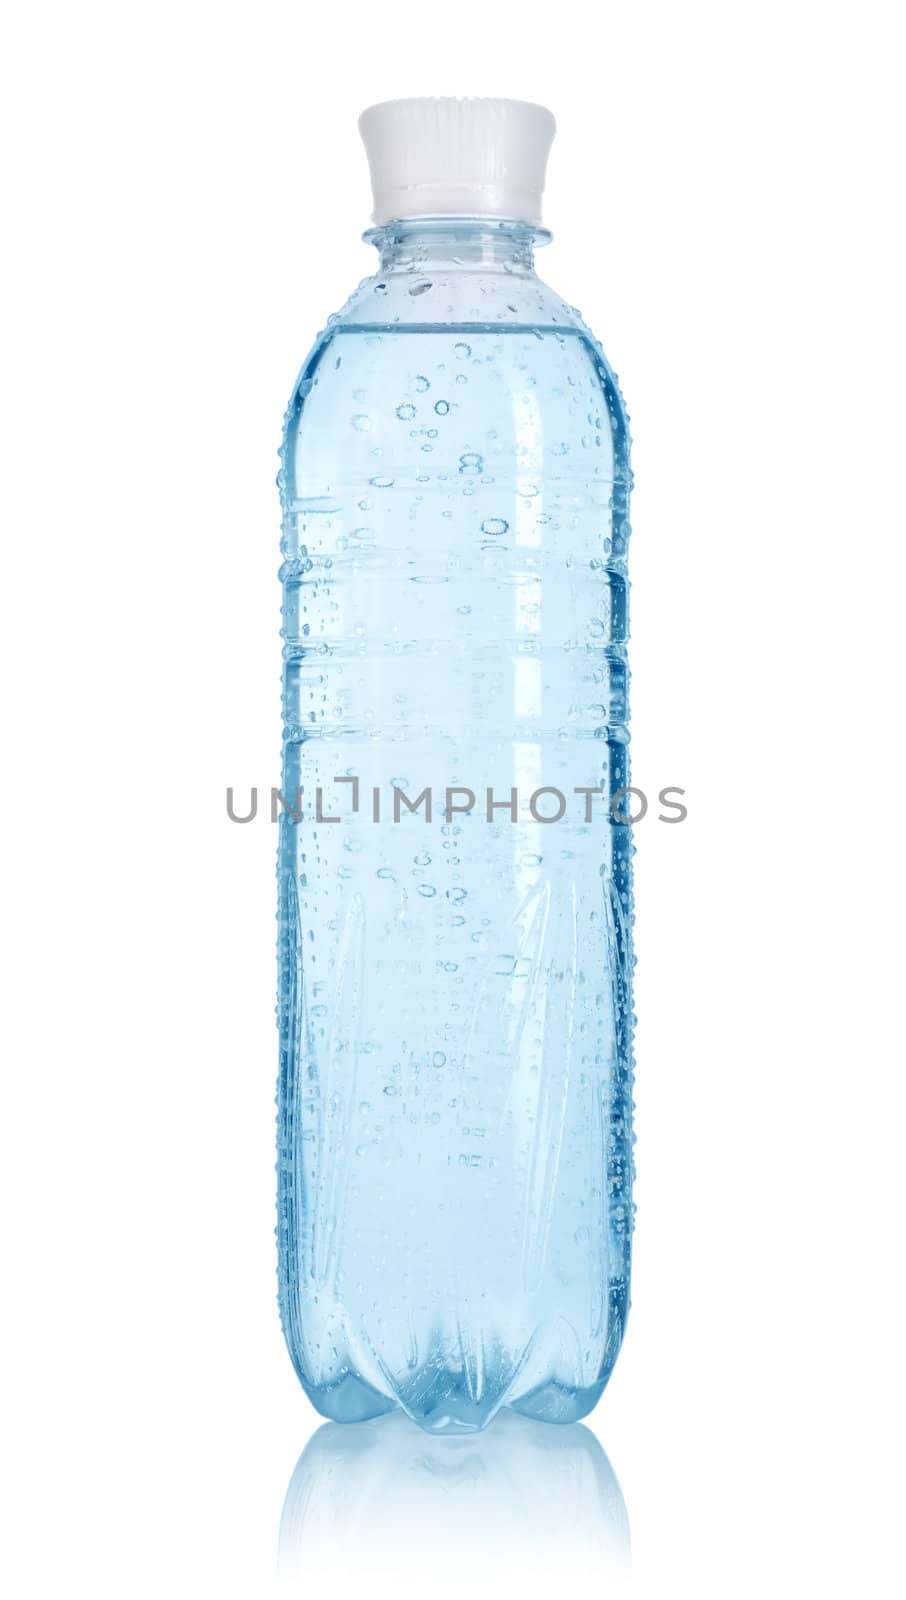 Plastic bottle of water isolated on a white background. Clipping path